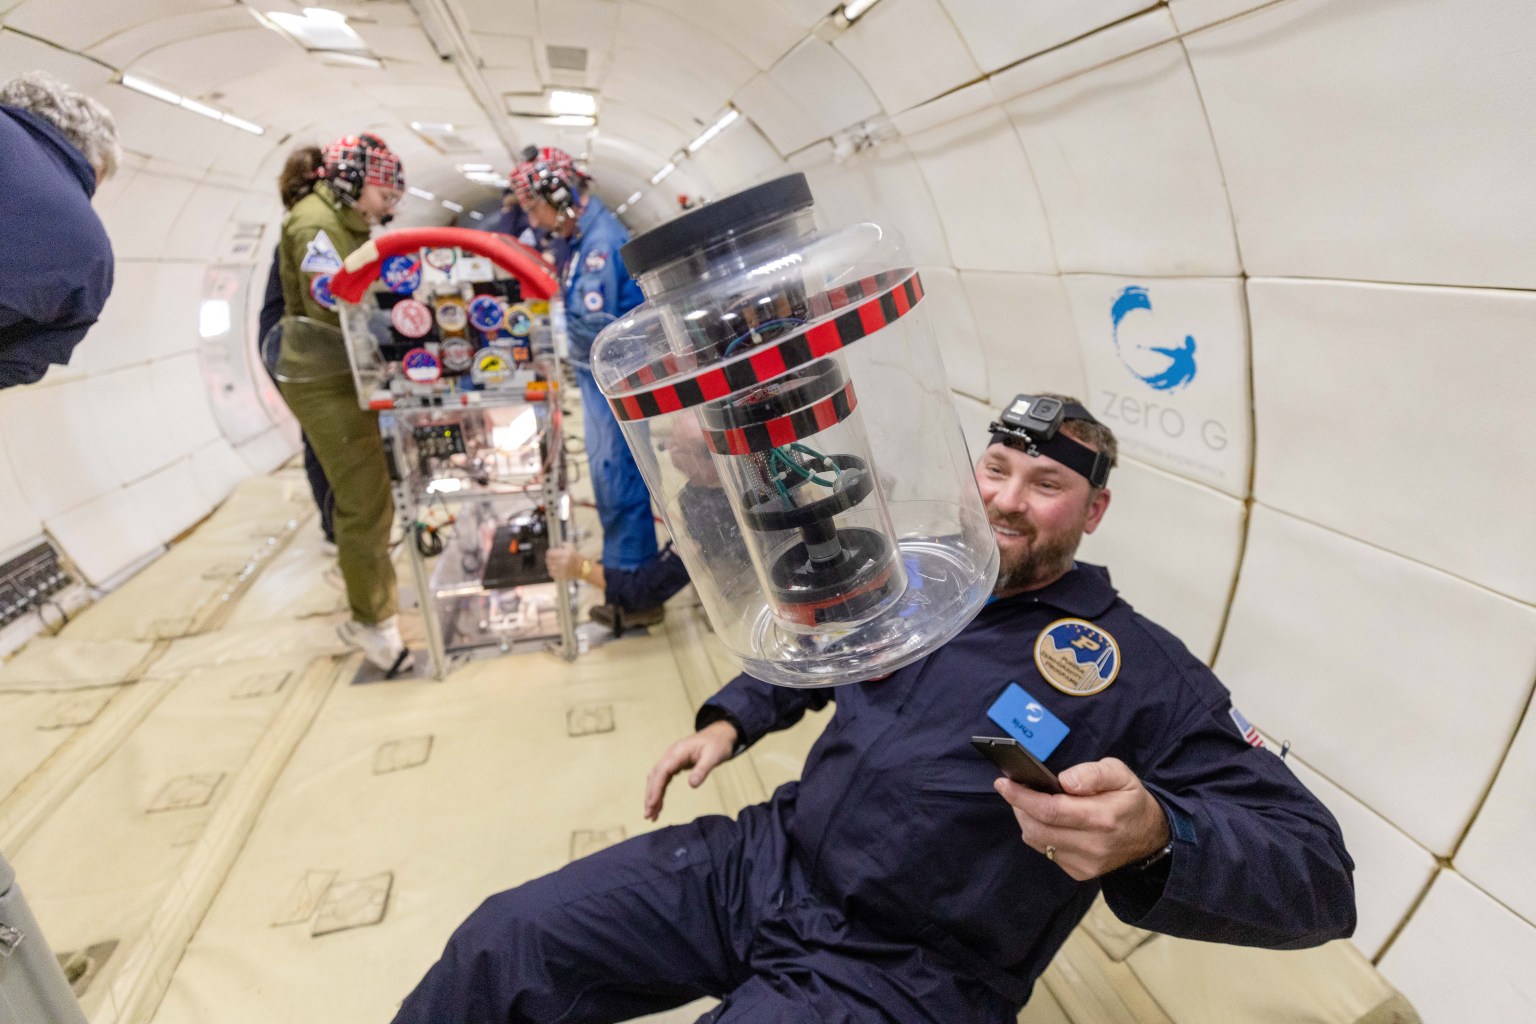 A device with black rings in a clear container floats in microgravity; a researcher with a head-mounted camera smiles at it. Background: Two researchers with surgical skull caps conduct experiments, their feet tucked under black straps to prevent floating.